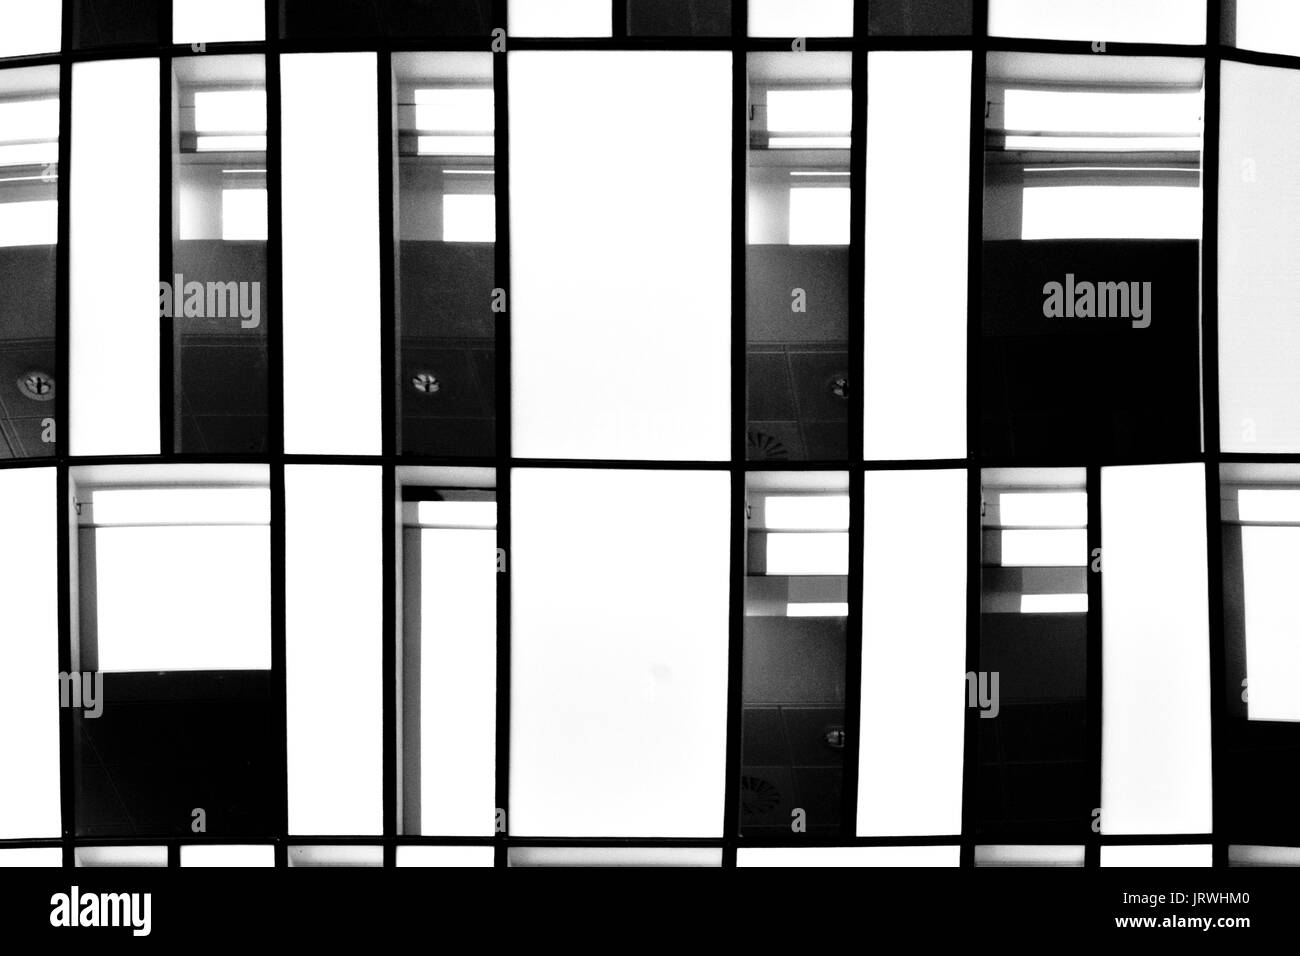 Building Structure, Glass Windows, Offices, Workplace, Black and White Images, Architecture Stock Photo